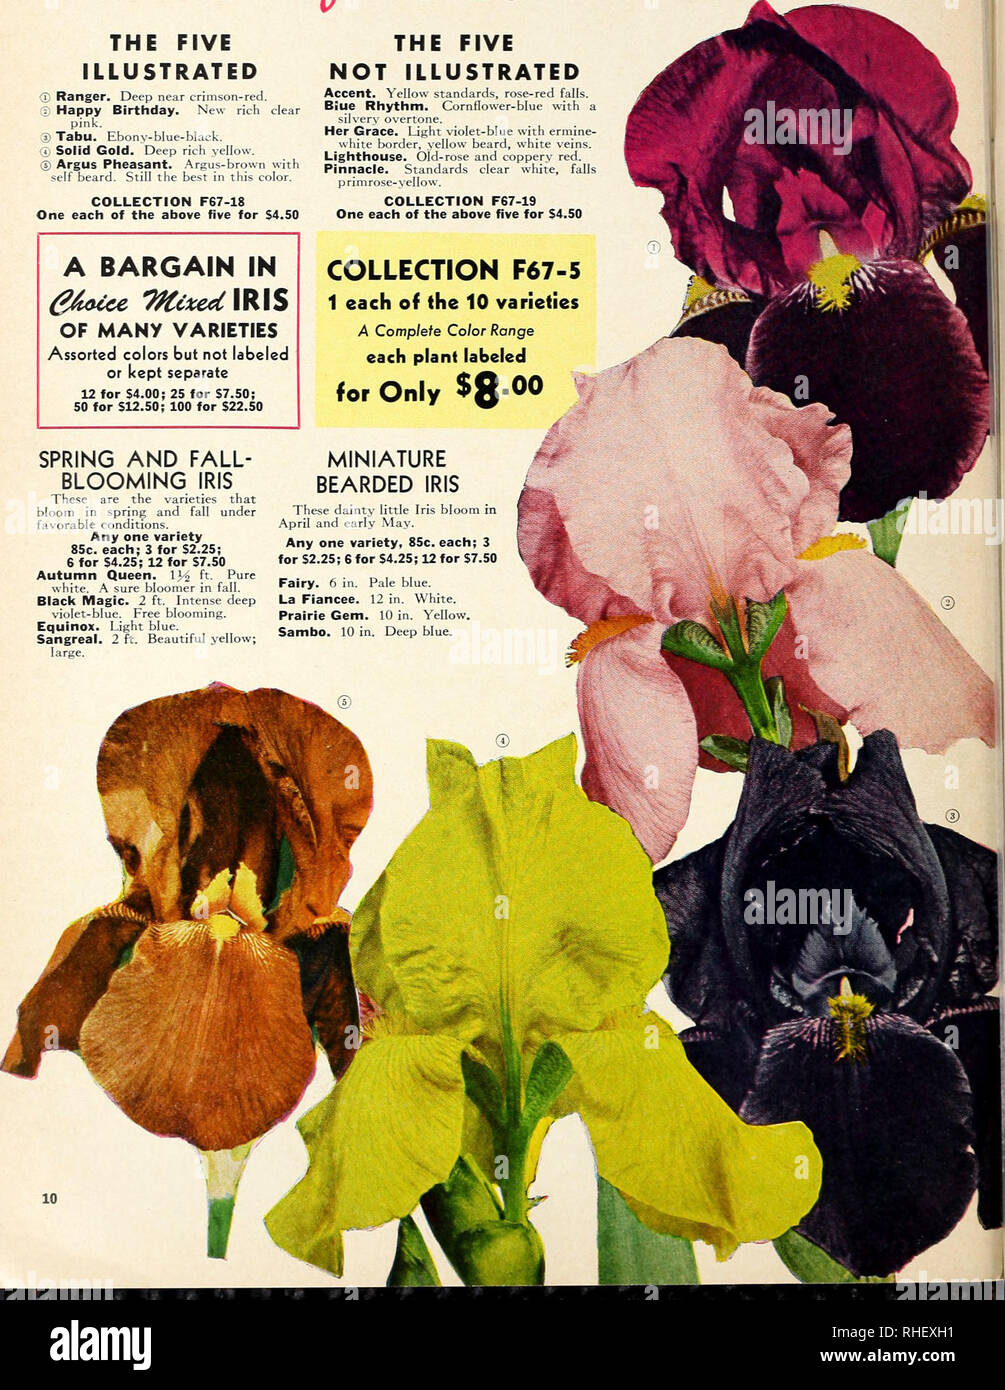 . Bolgiano's fall 1967. Nurseries (Horticulture) Catalogs; Bulbs (Plants) Catalogs; Seeds Catalogs; Trees Catalogs. Free Blooming and Easy-to-Grow TEN Sccuct^cd IRIS See page 11 for complete list. Individual prices for all 10 varieties: $1.00 each; 3 for $2.50 THE FIVE ILLUSTRATED O Ranger. Deep near crimson-red. © Happy Birthday. New rich clear pink. ® Tabu. Ebony-blue-black. q) Solid Gold. Deep rich yellow. ® Argus Plieasant. Argus-brown with self beard. Still the best in this color. COLLECTION F67-18 One each of the above five for S4.50 A BARGAIN IN OF MANY VARIETIES Assorted colors but not Stock Photo